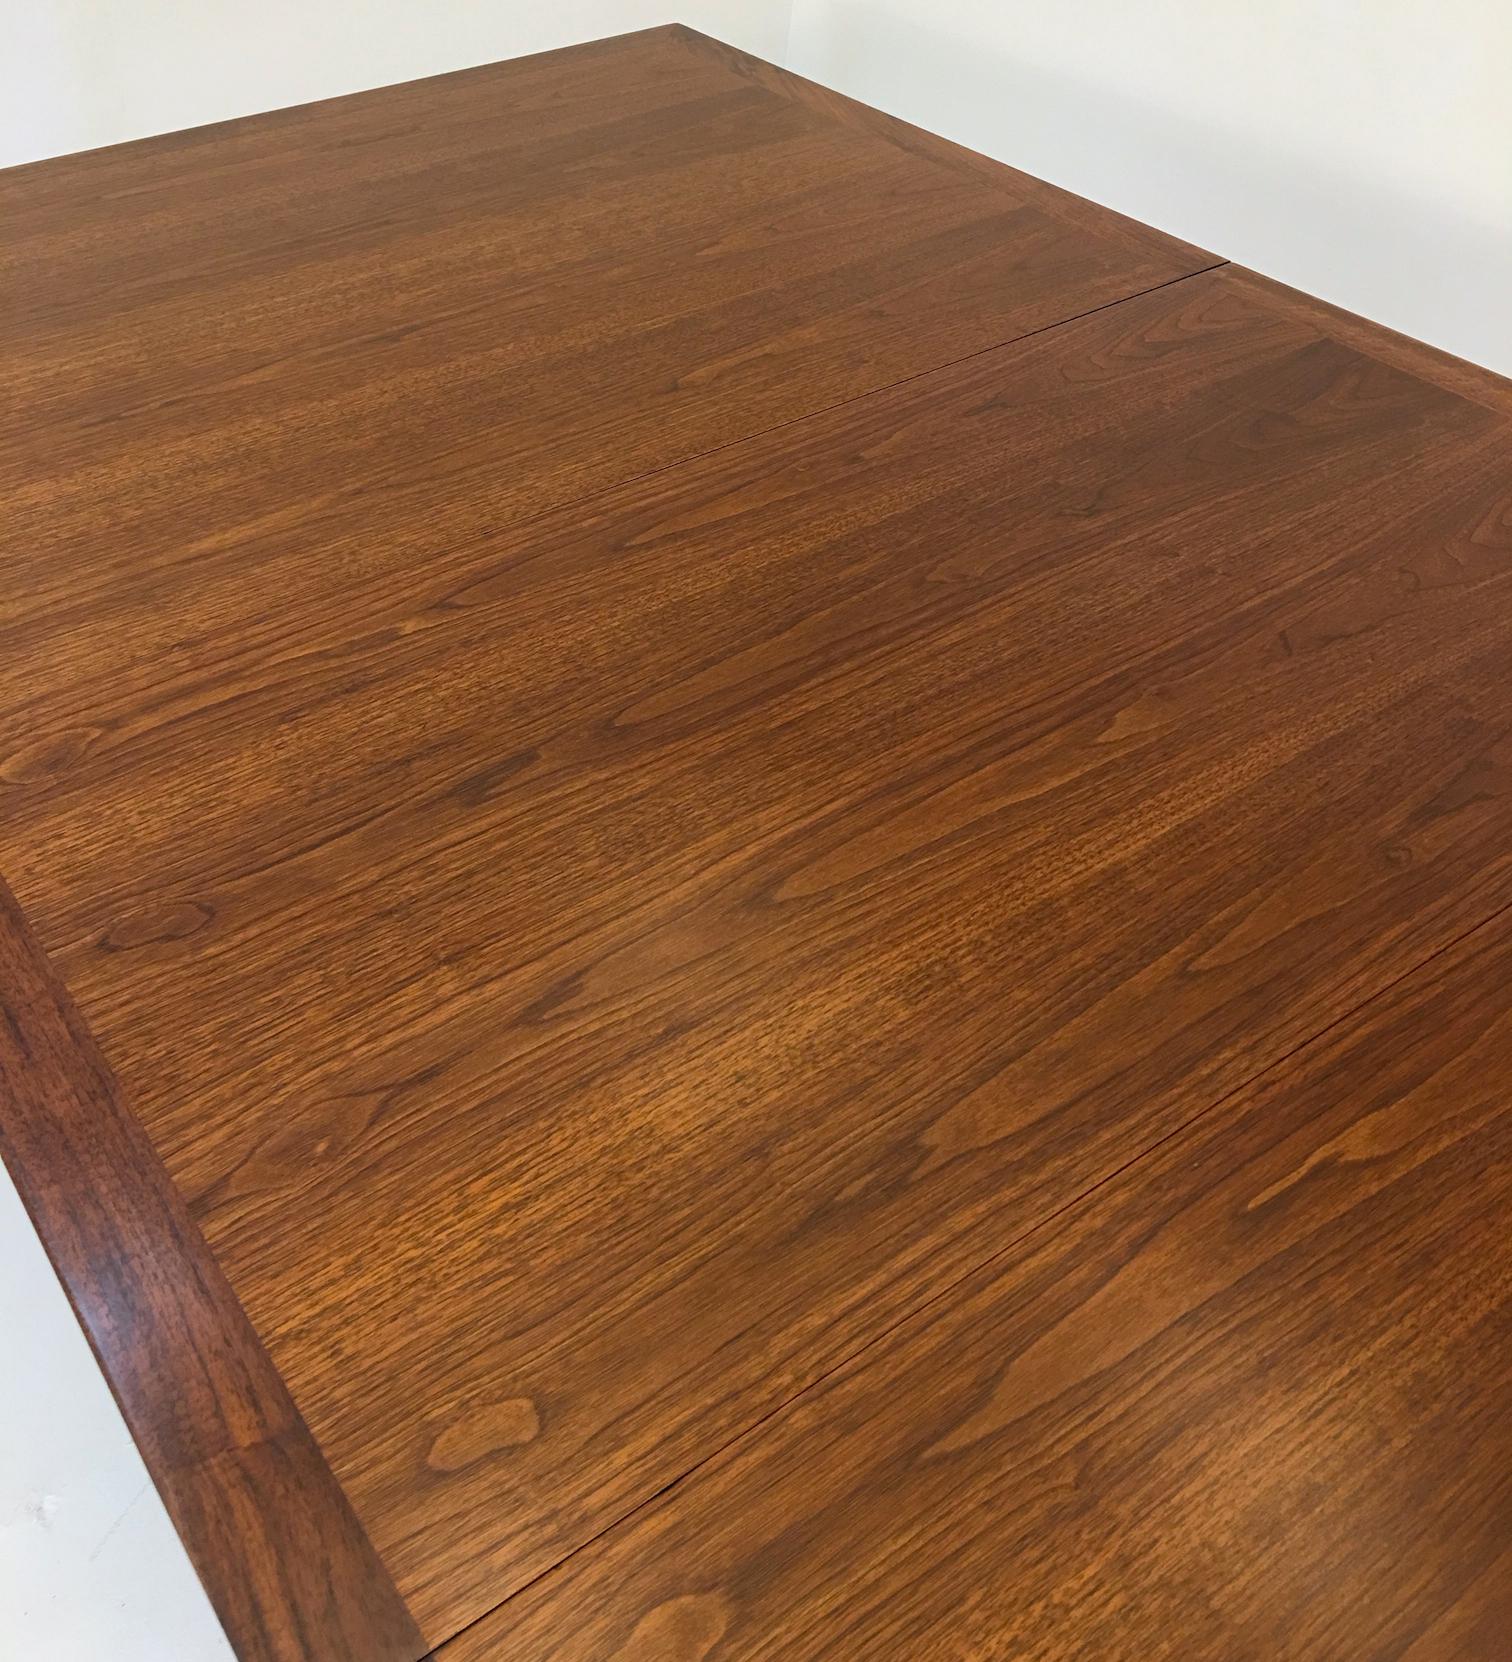 Complete Oiled Walnut Dining Table by Dunbar im Zustand „Hervorragend“ in South Charleston, WV